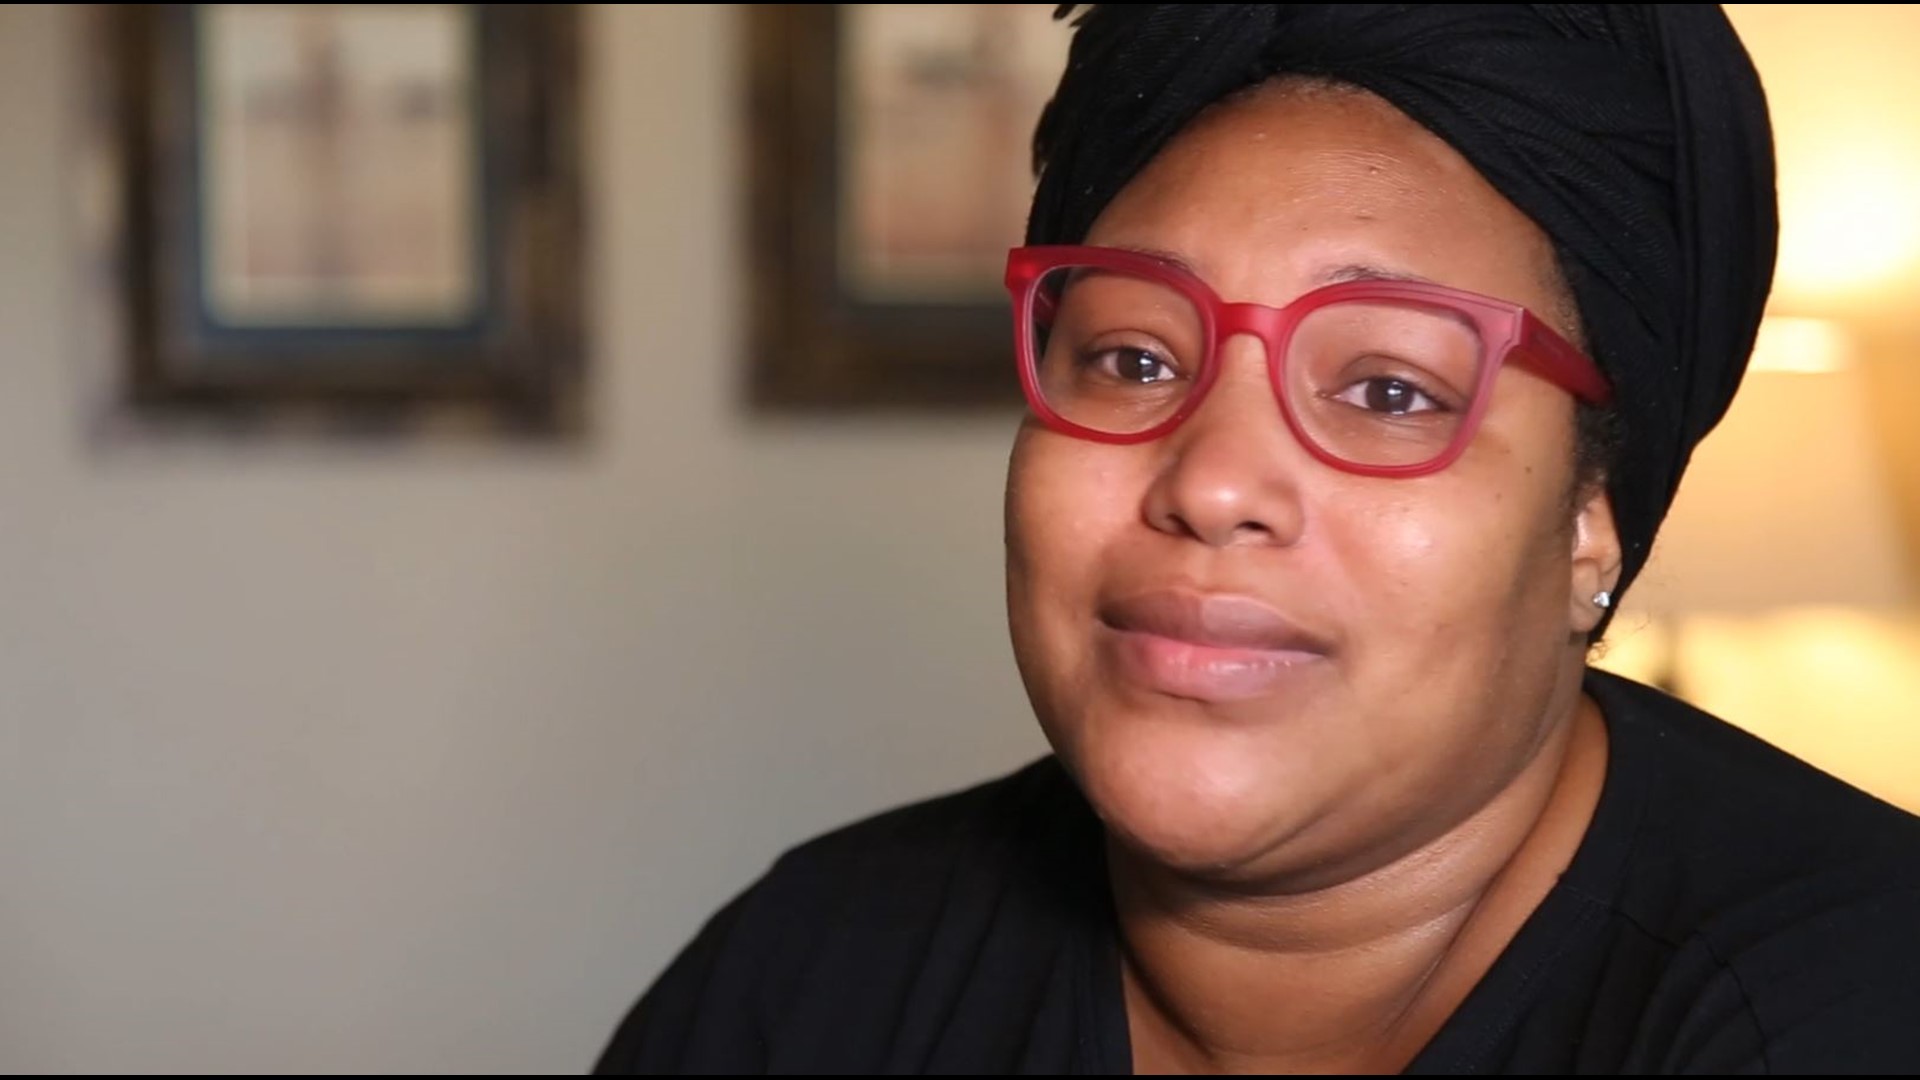 A Mom Lost Her Job And Ended Up Living In A Hotel Room Then Interfaith Dallas Turned Her Life